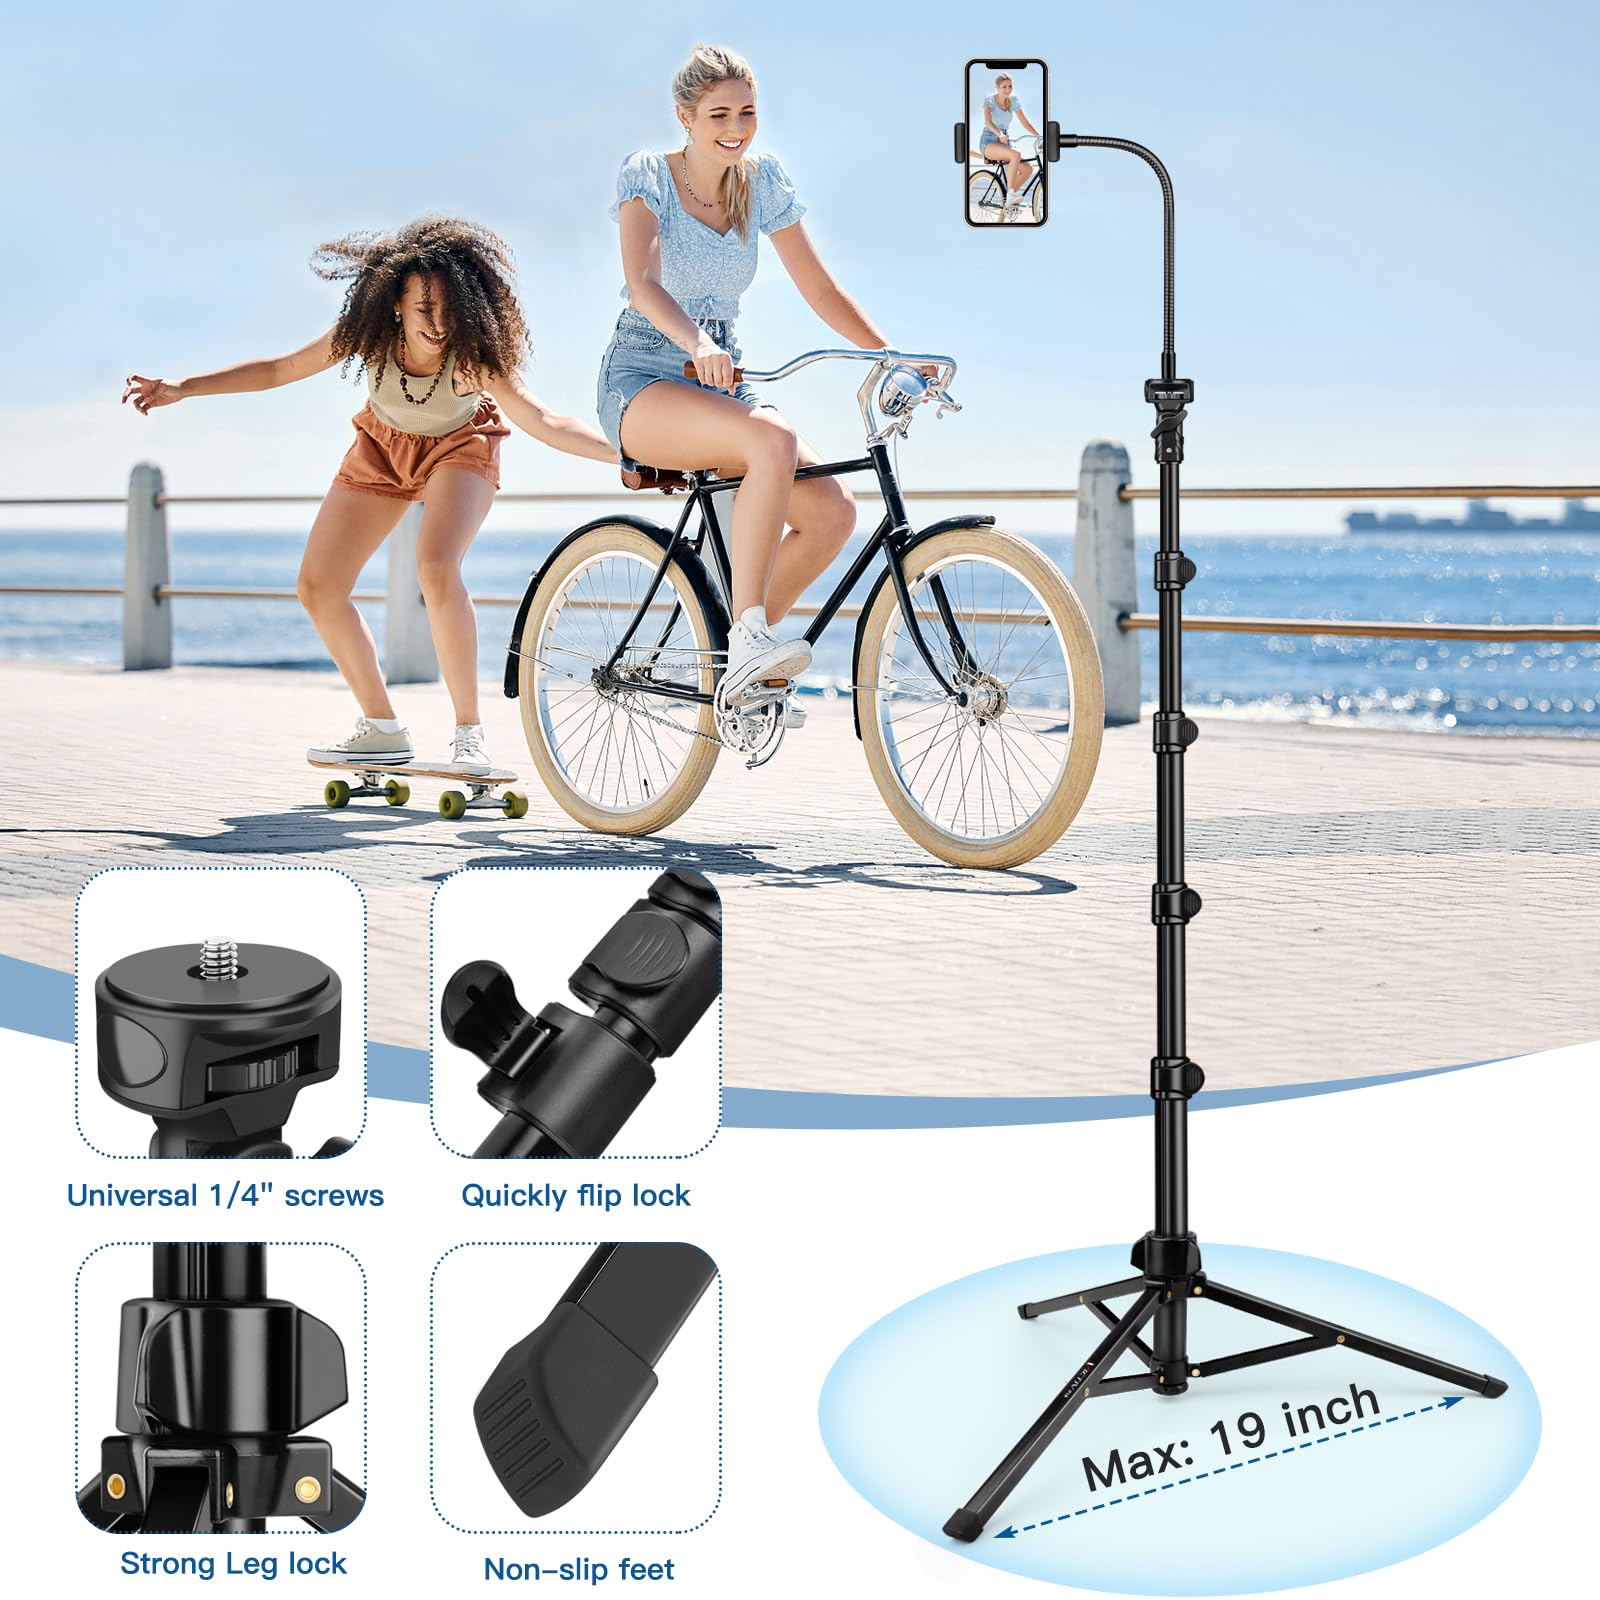 Phone Tripod Stand, 85" Tall Cellphone Tripod with Gooseneck Remote, Flexible Tripod Stand for iphone, Portable Phone Stand Tripod for Recording, Compatible with iPhone 14 13 12 pro Android Cell phone